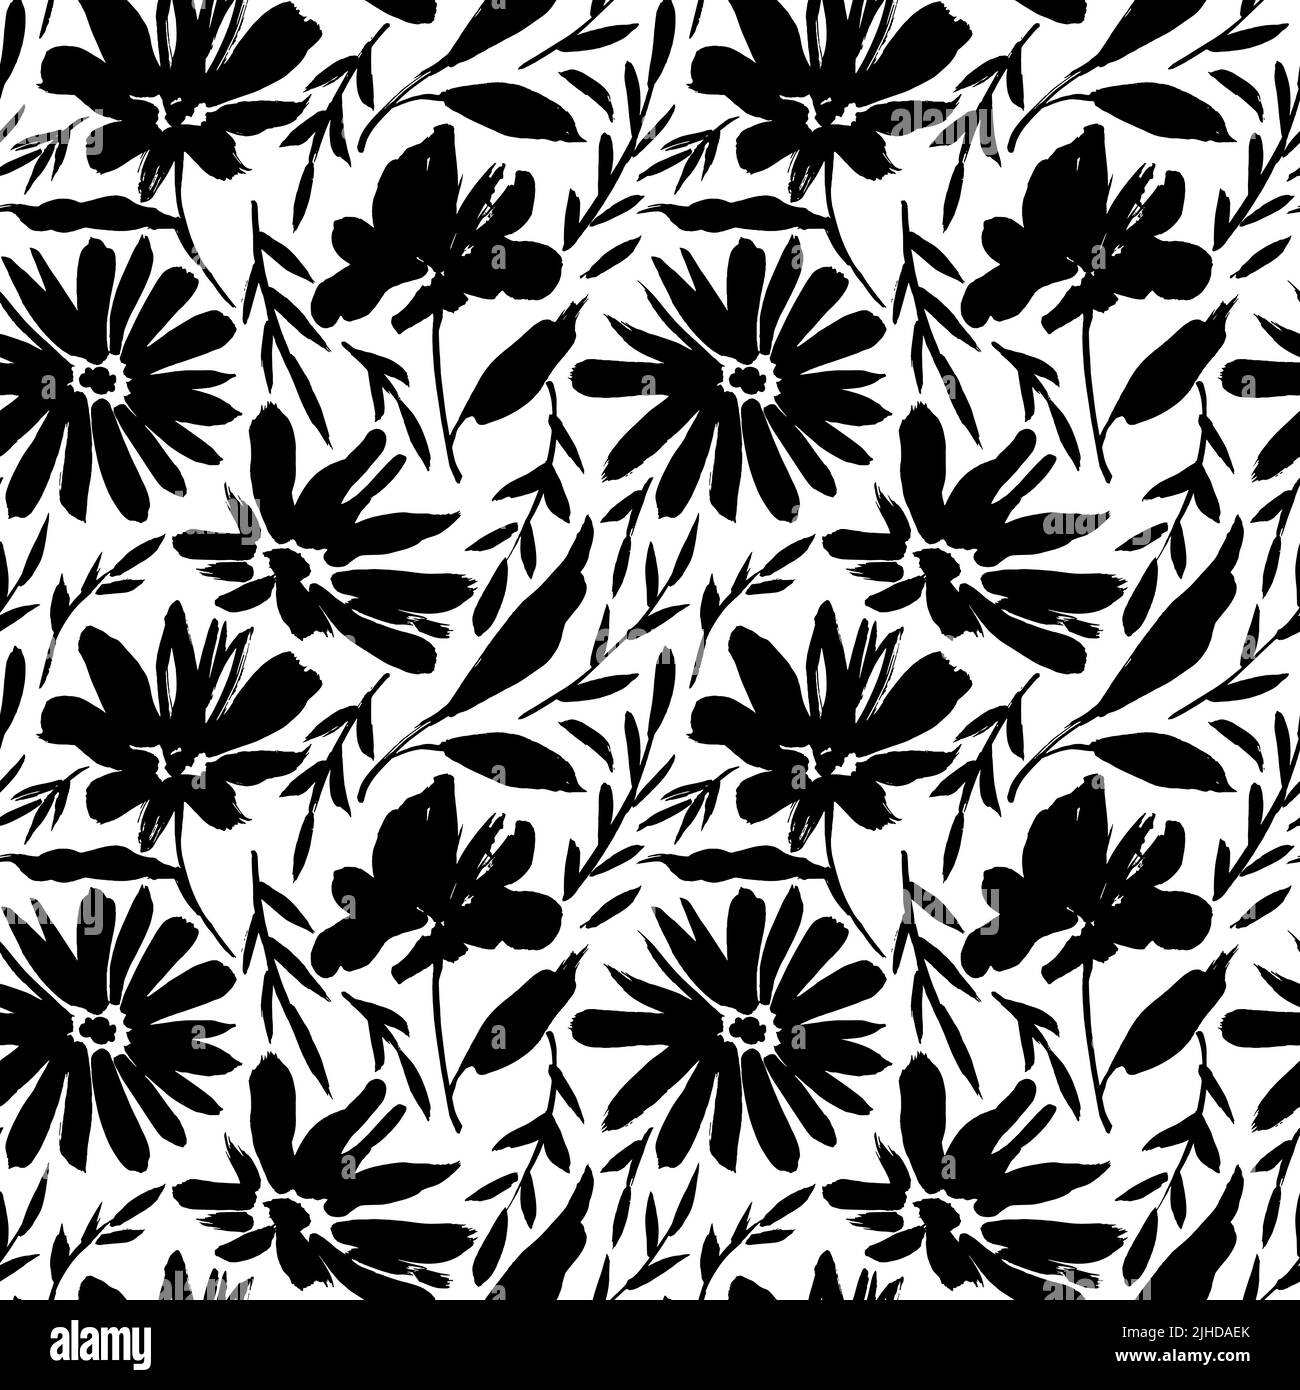 Hand drawn wild flowers vector seamless pattern Stock Vector